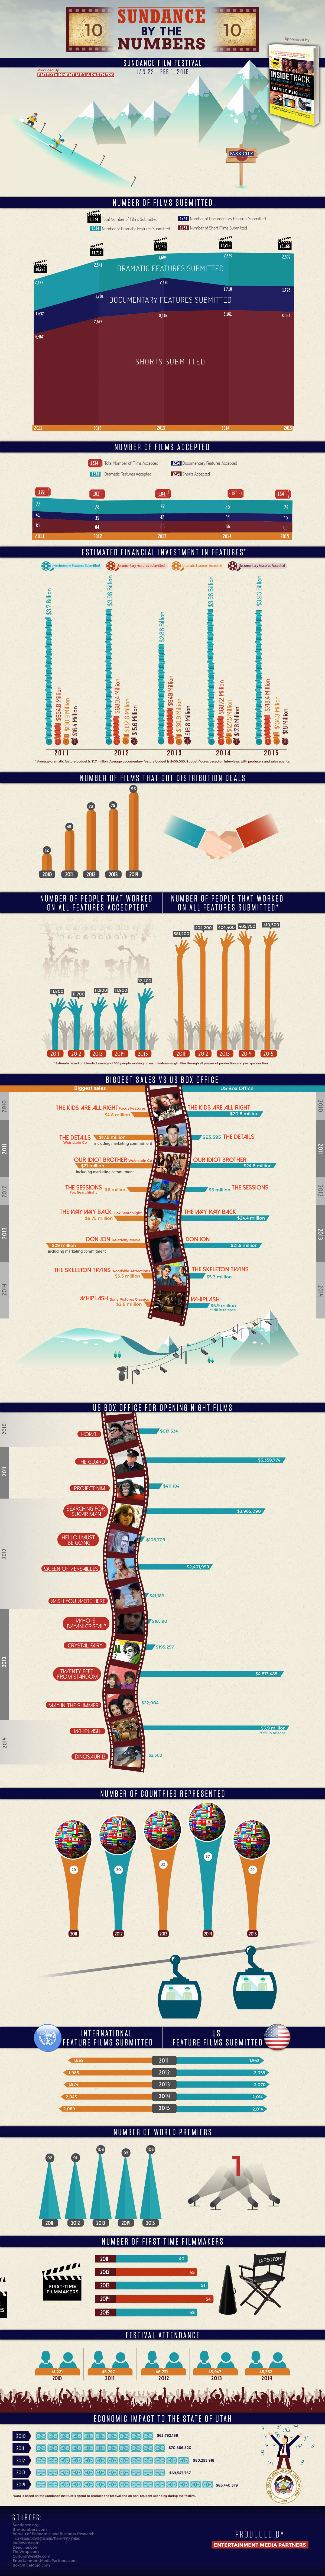 Sundance 2015 Infographic Produced by Entertainment Media Partners for Cultural Weekly. Sponsored by 'Inside Track for Independent Filmmakers,' available now.